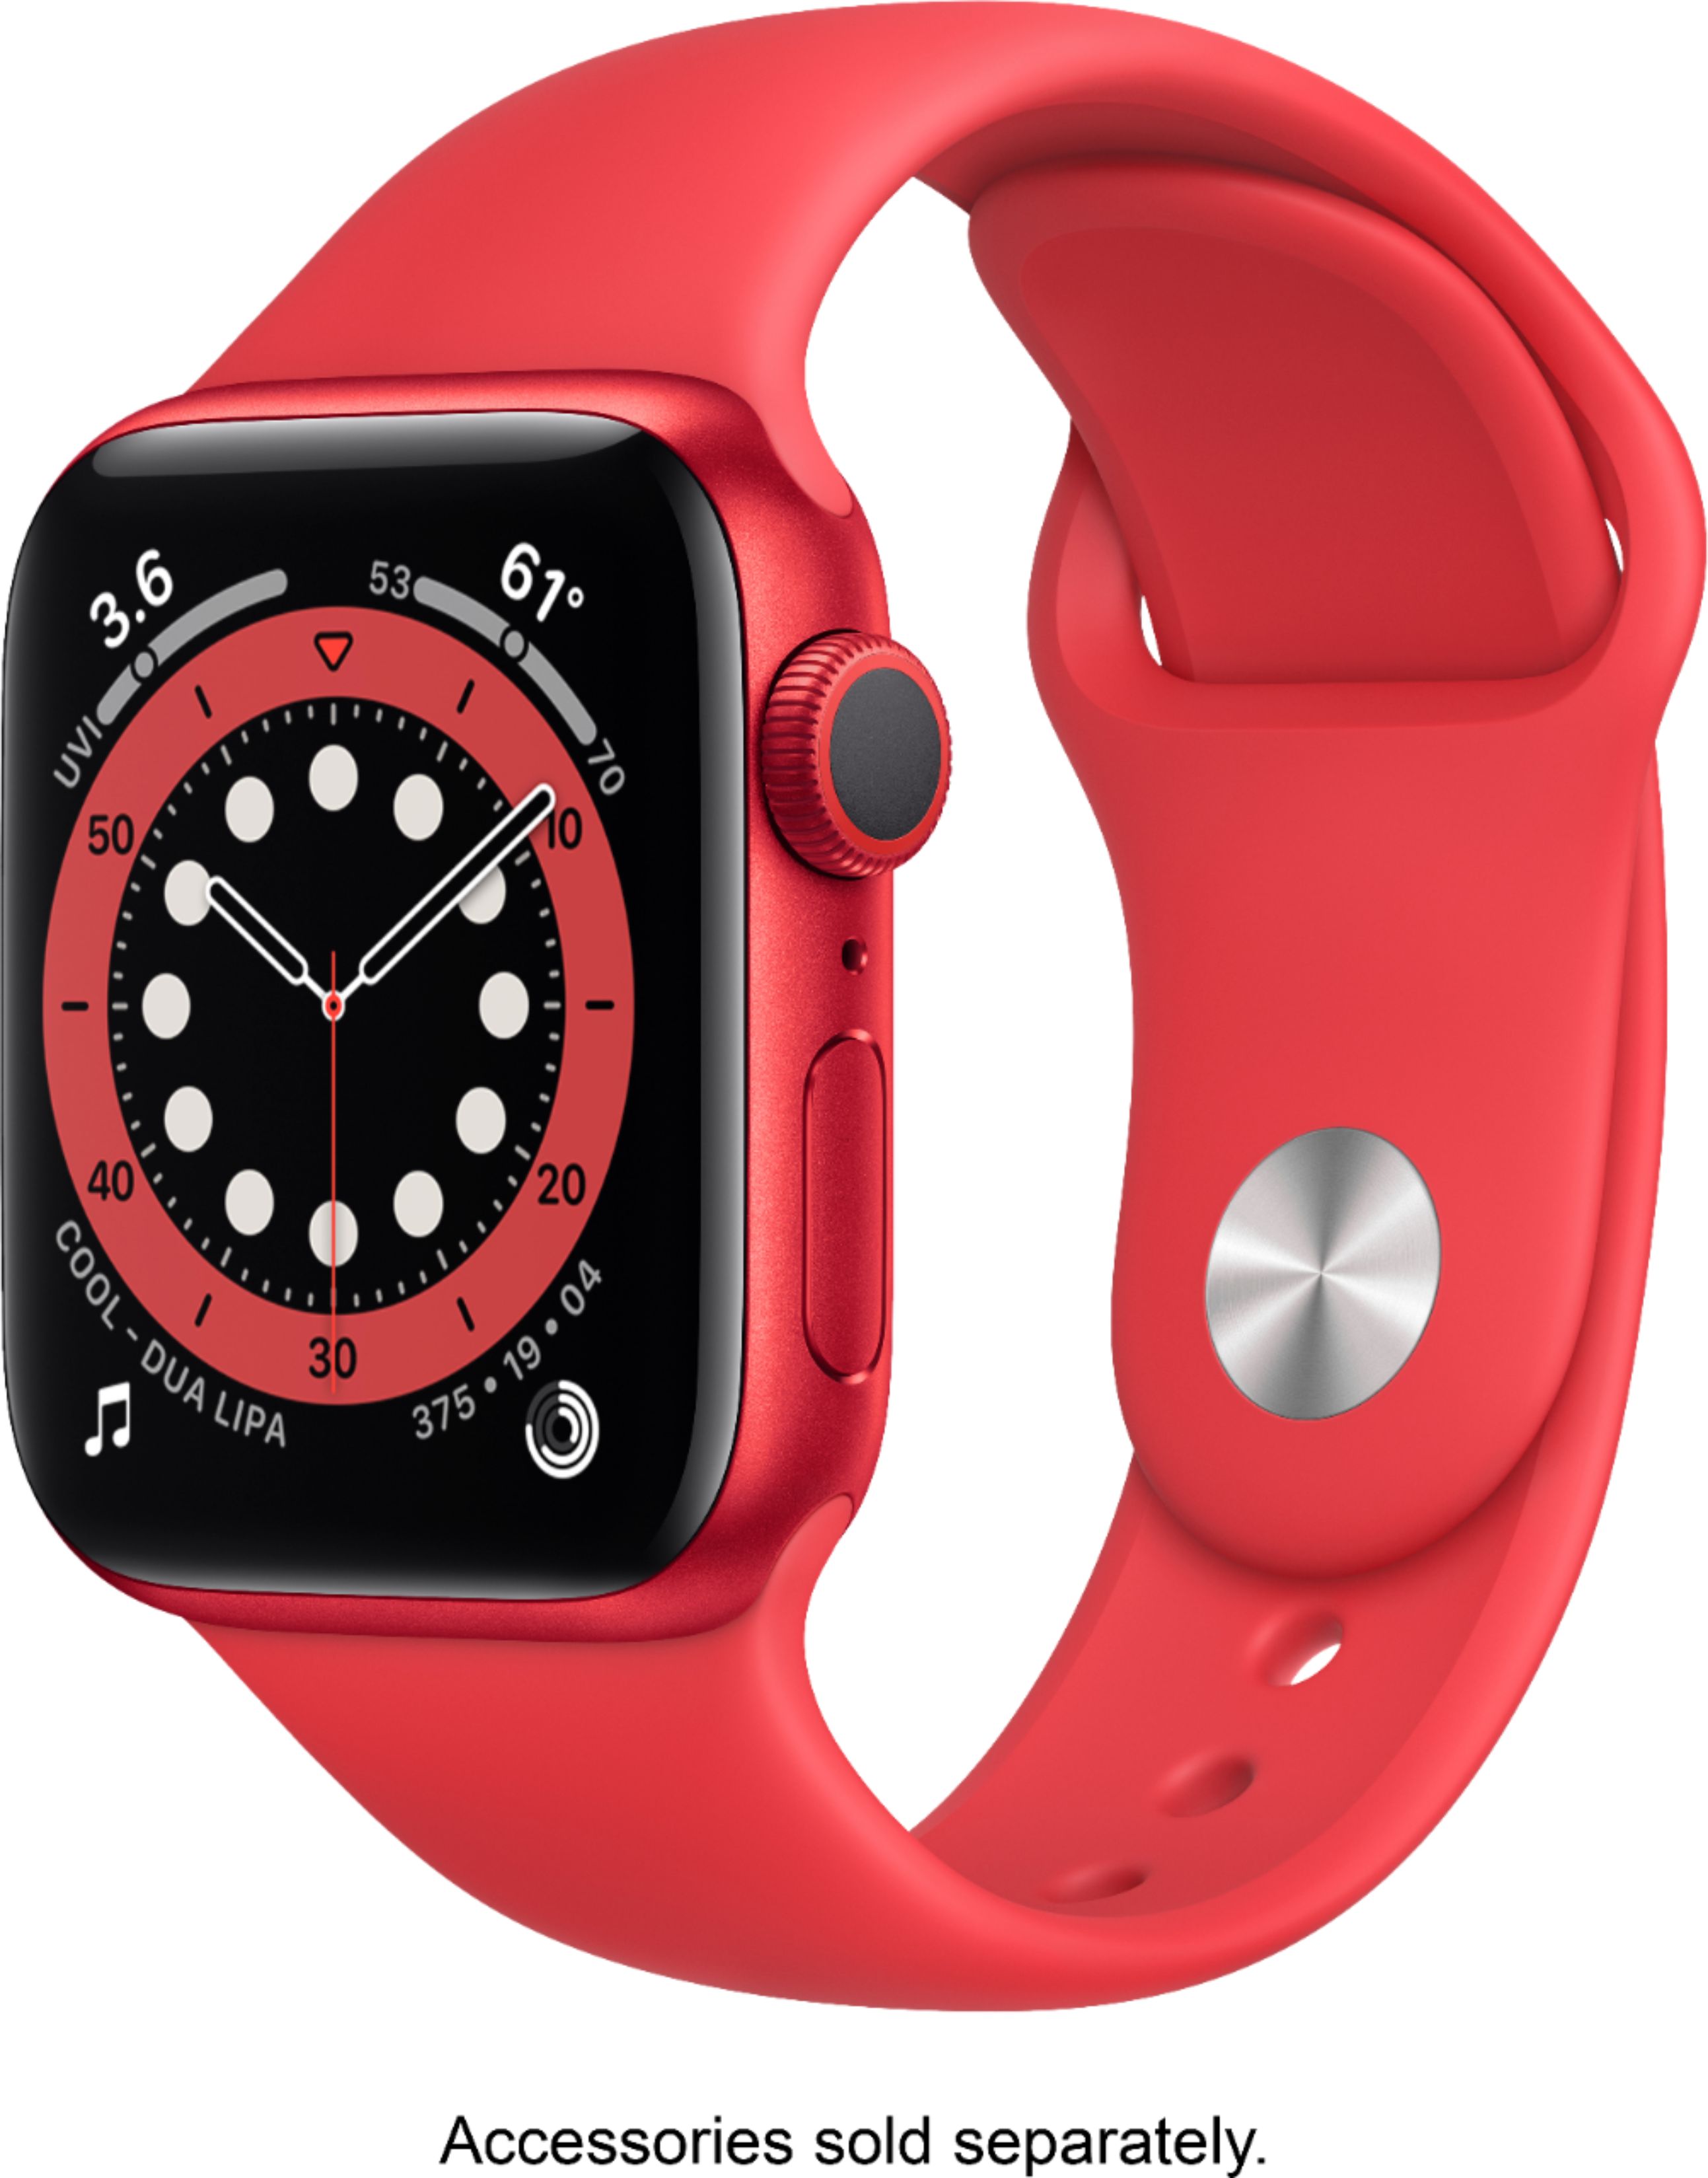 Apple Watch Series 6 (GPS) 40mm (PRODUCT)RED - Best Buy